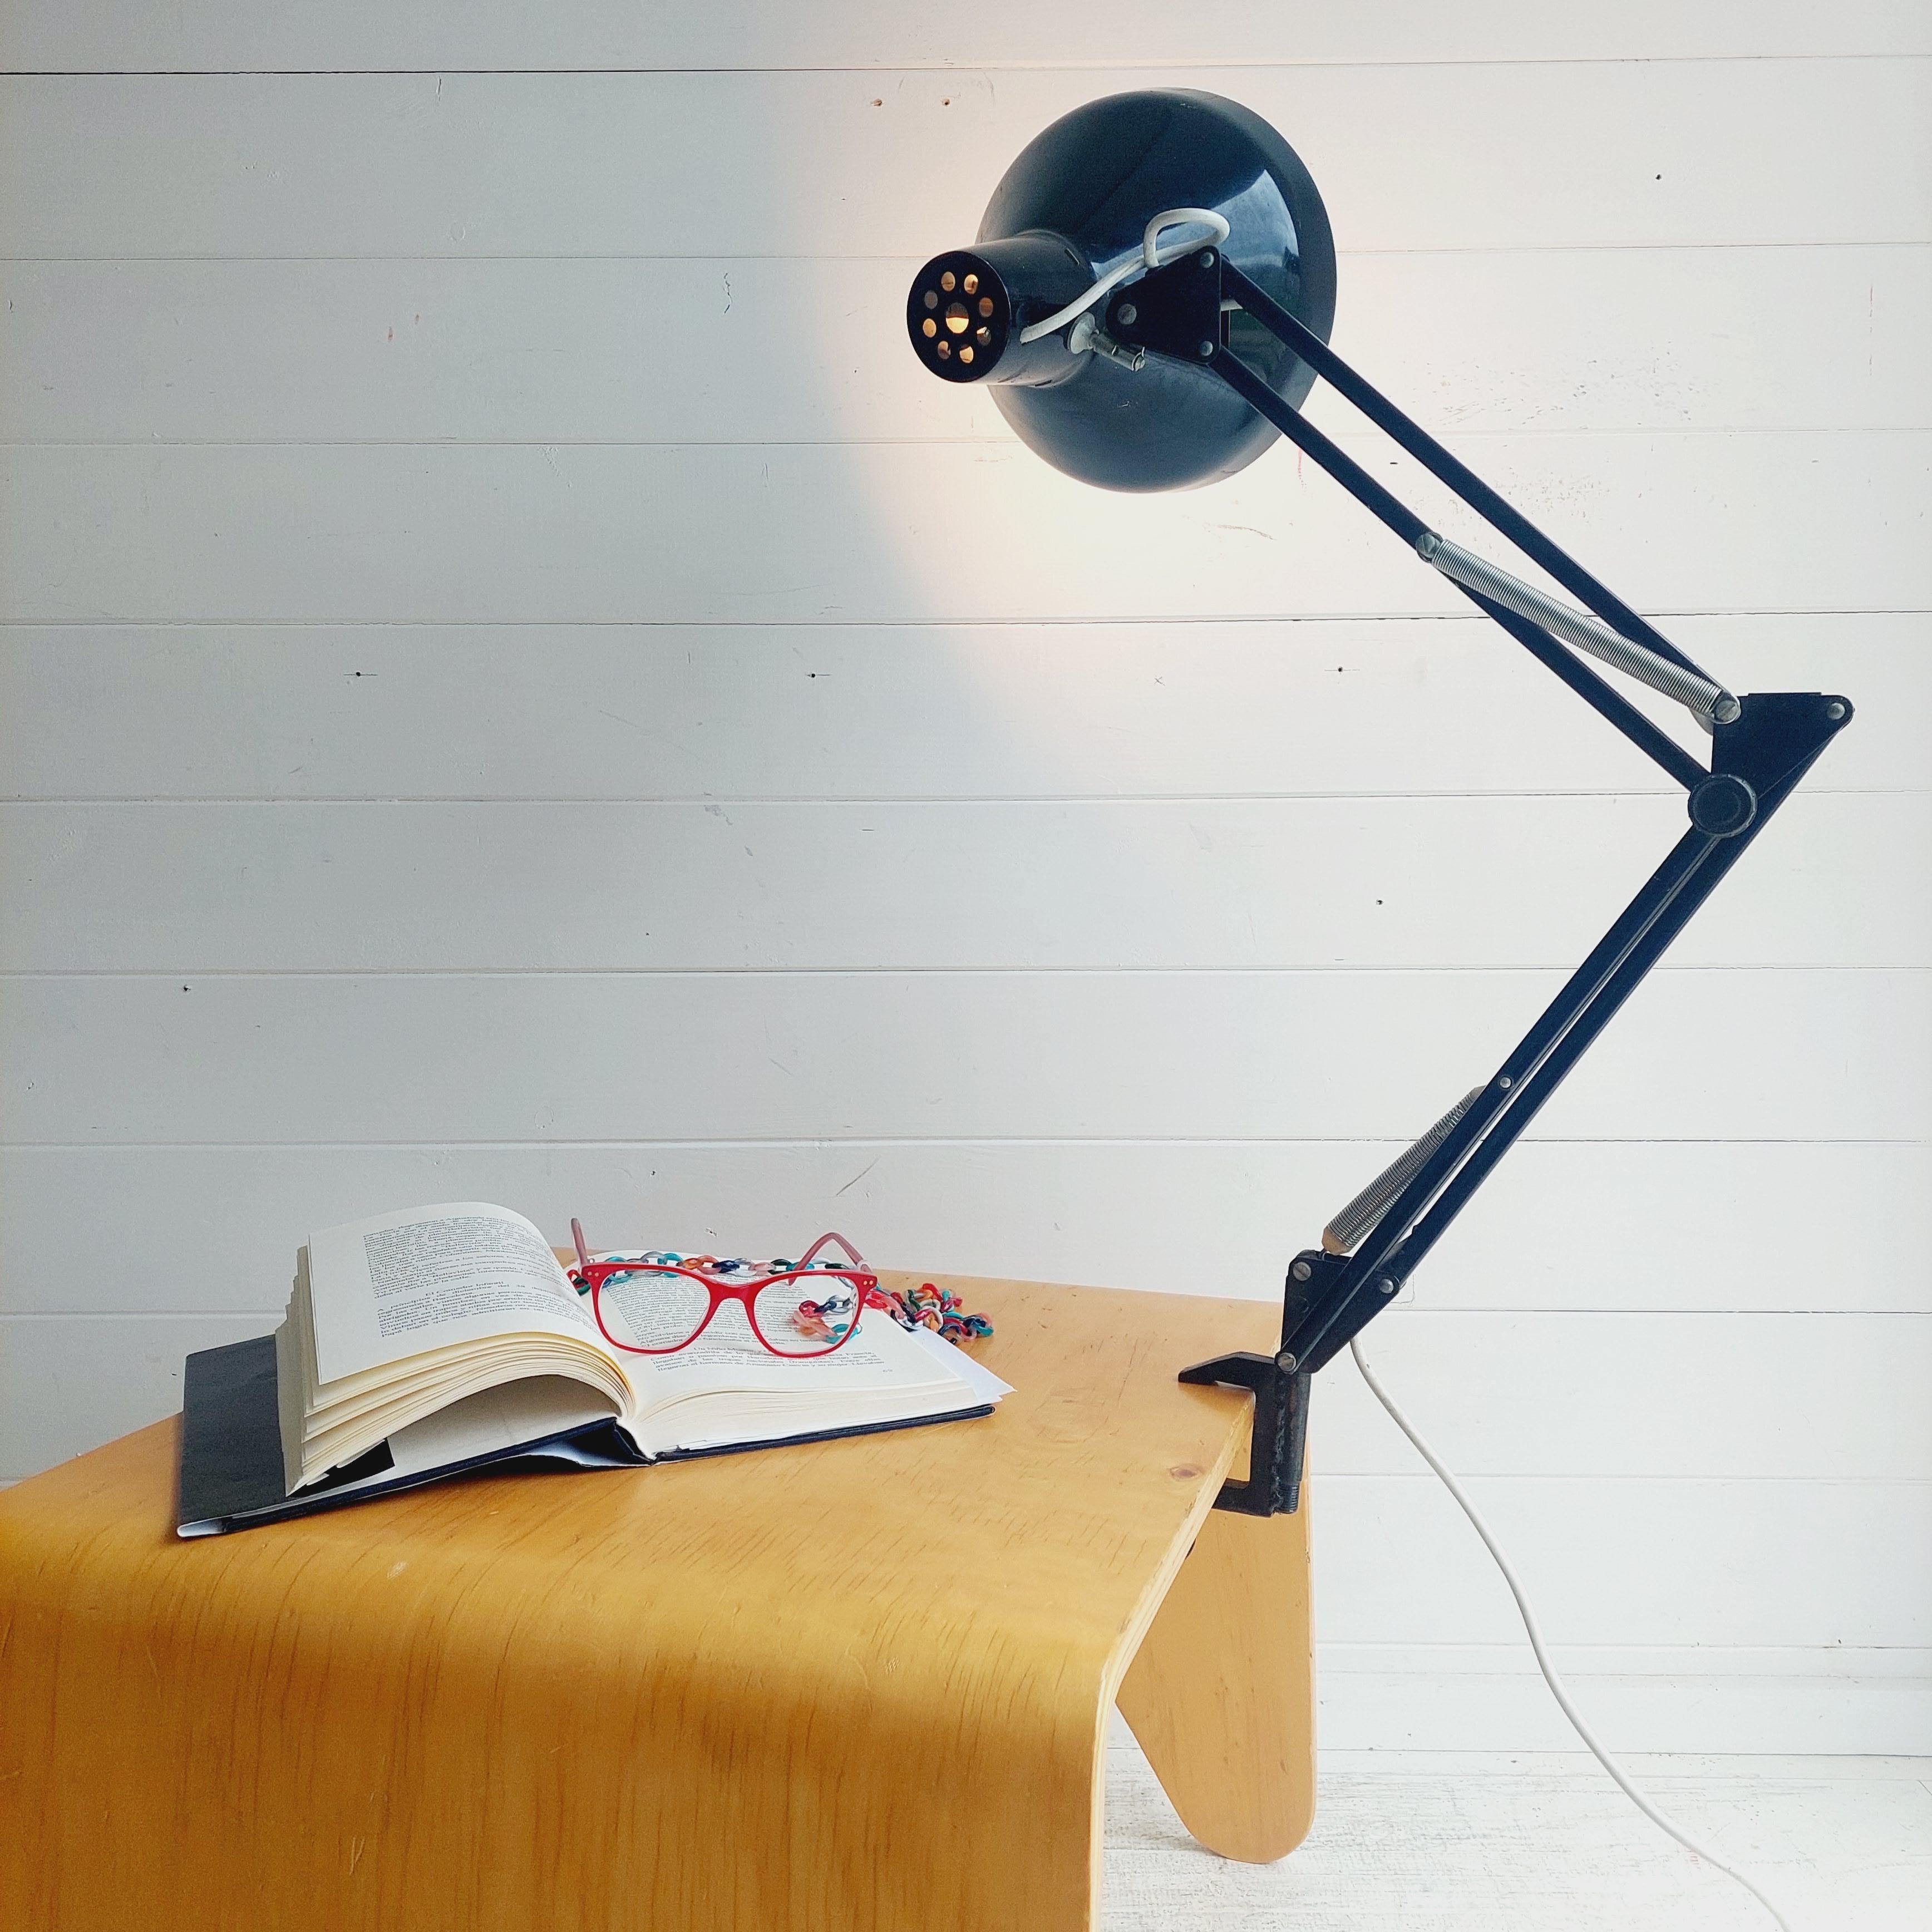 A mid century metal Anglepoise desk light with clamp.
Herbert Terry & Sons Ltd. Black Anglepoise Desk/Wall Clamp Lamp.
Made in the UK and likely 1950s-1960s

We love the industrial feel, especially the simple frame and the reflector shade!
It simply